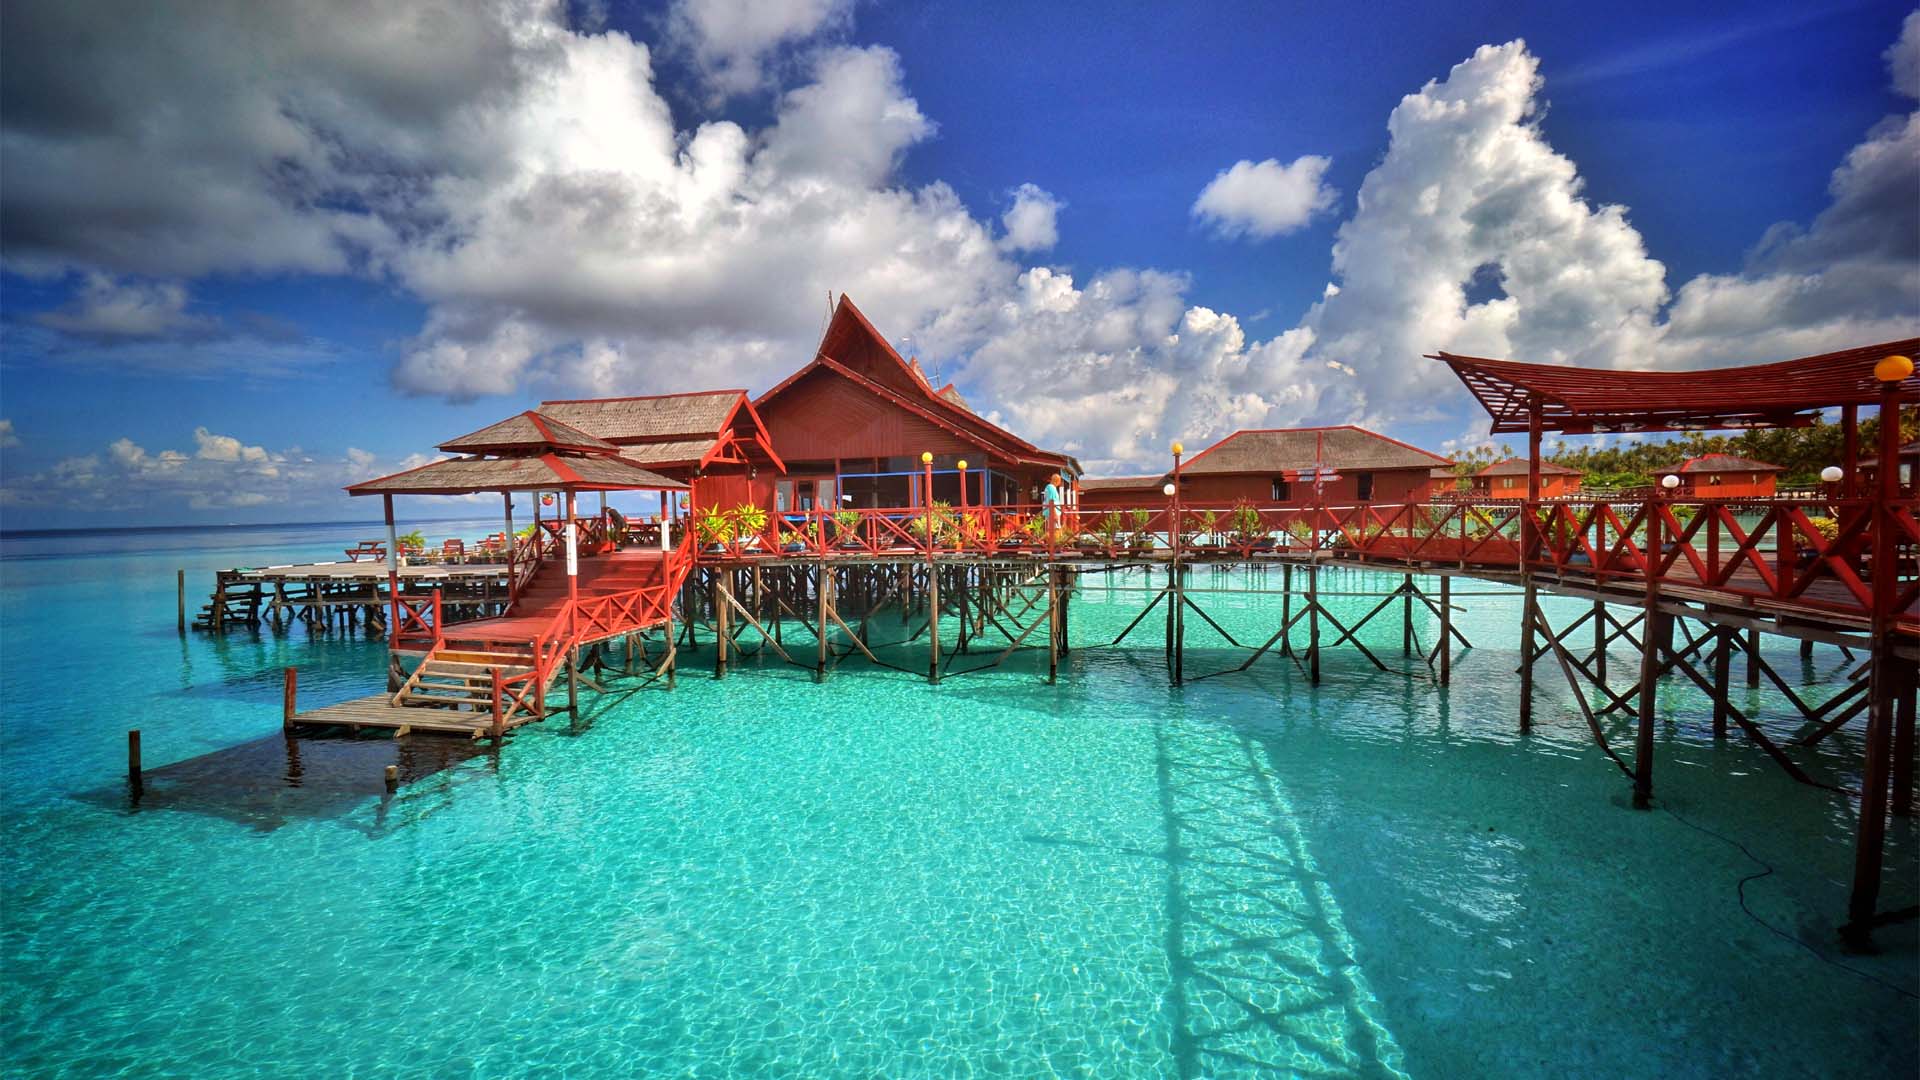 A Guide to Derawan Islands, the Paradise of East Kalimantan